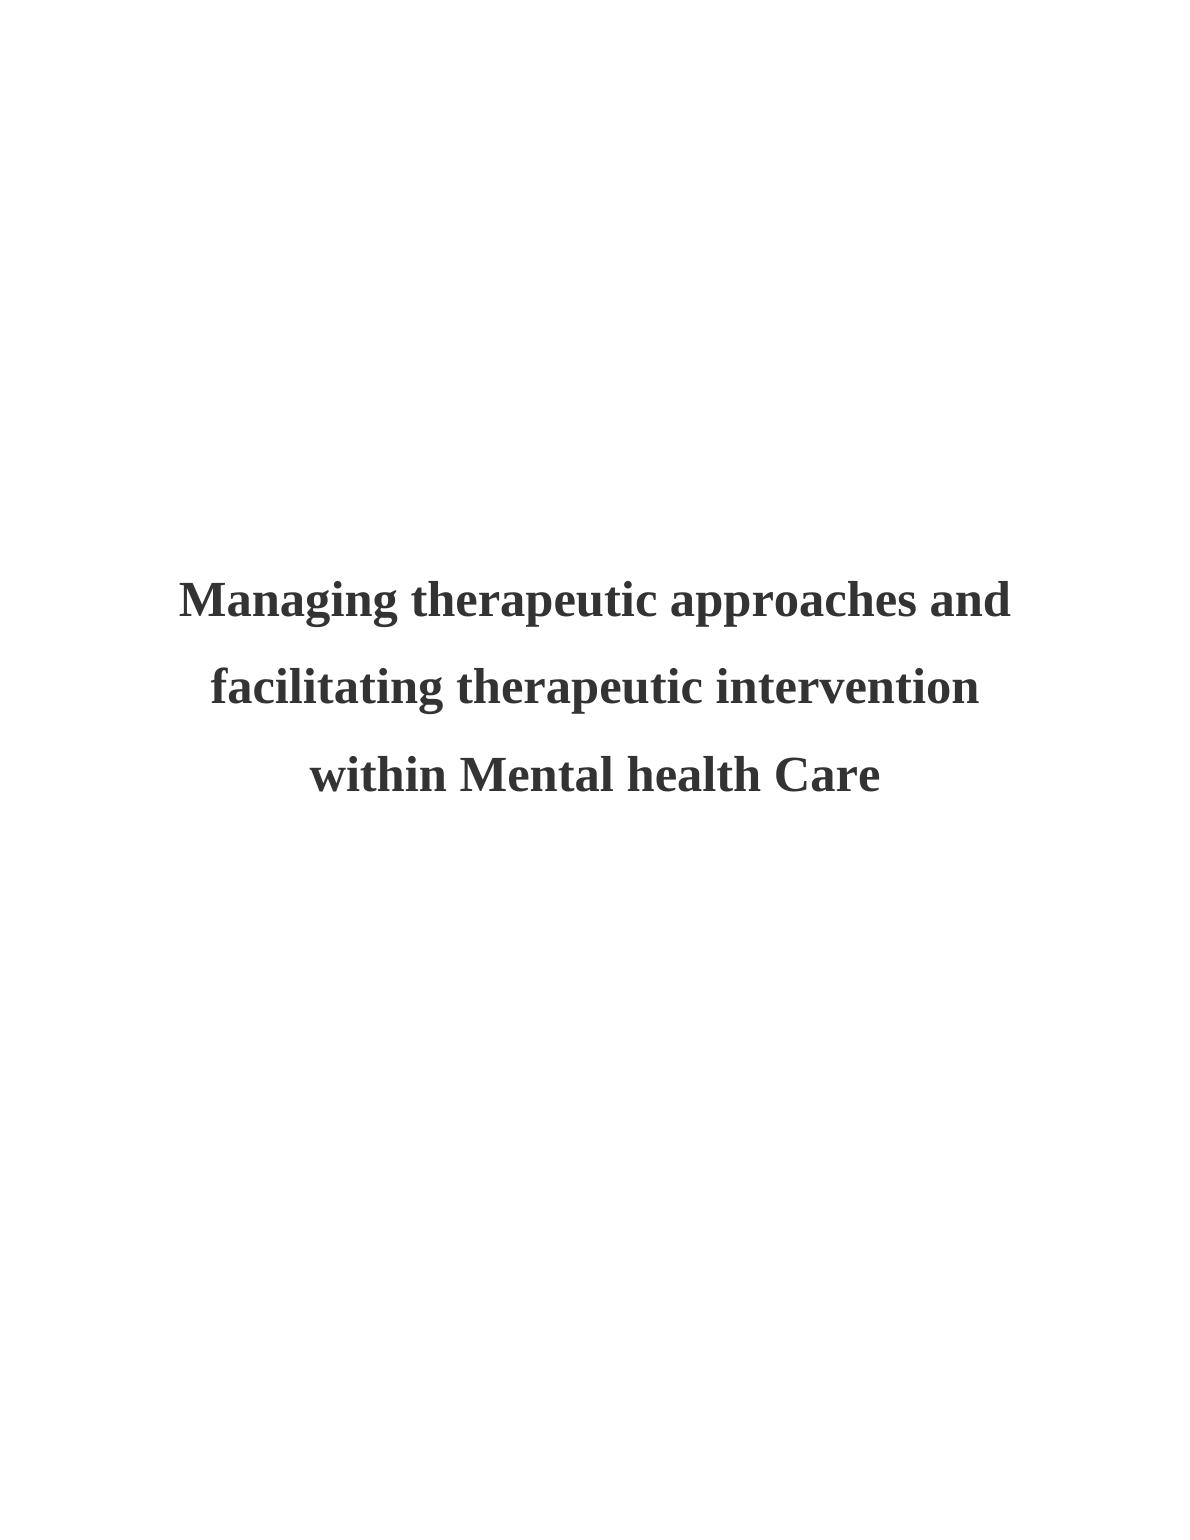 Managing Therapeutic Approaches and Facilitating Therapeutic Intervention within Mental Health Care_1